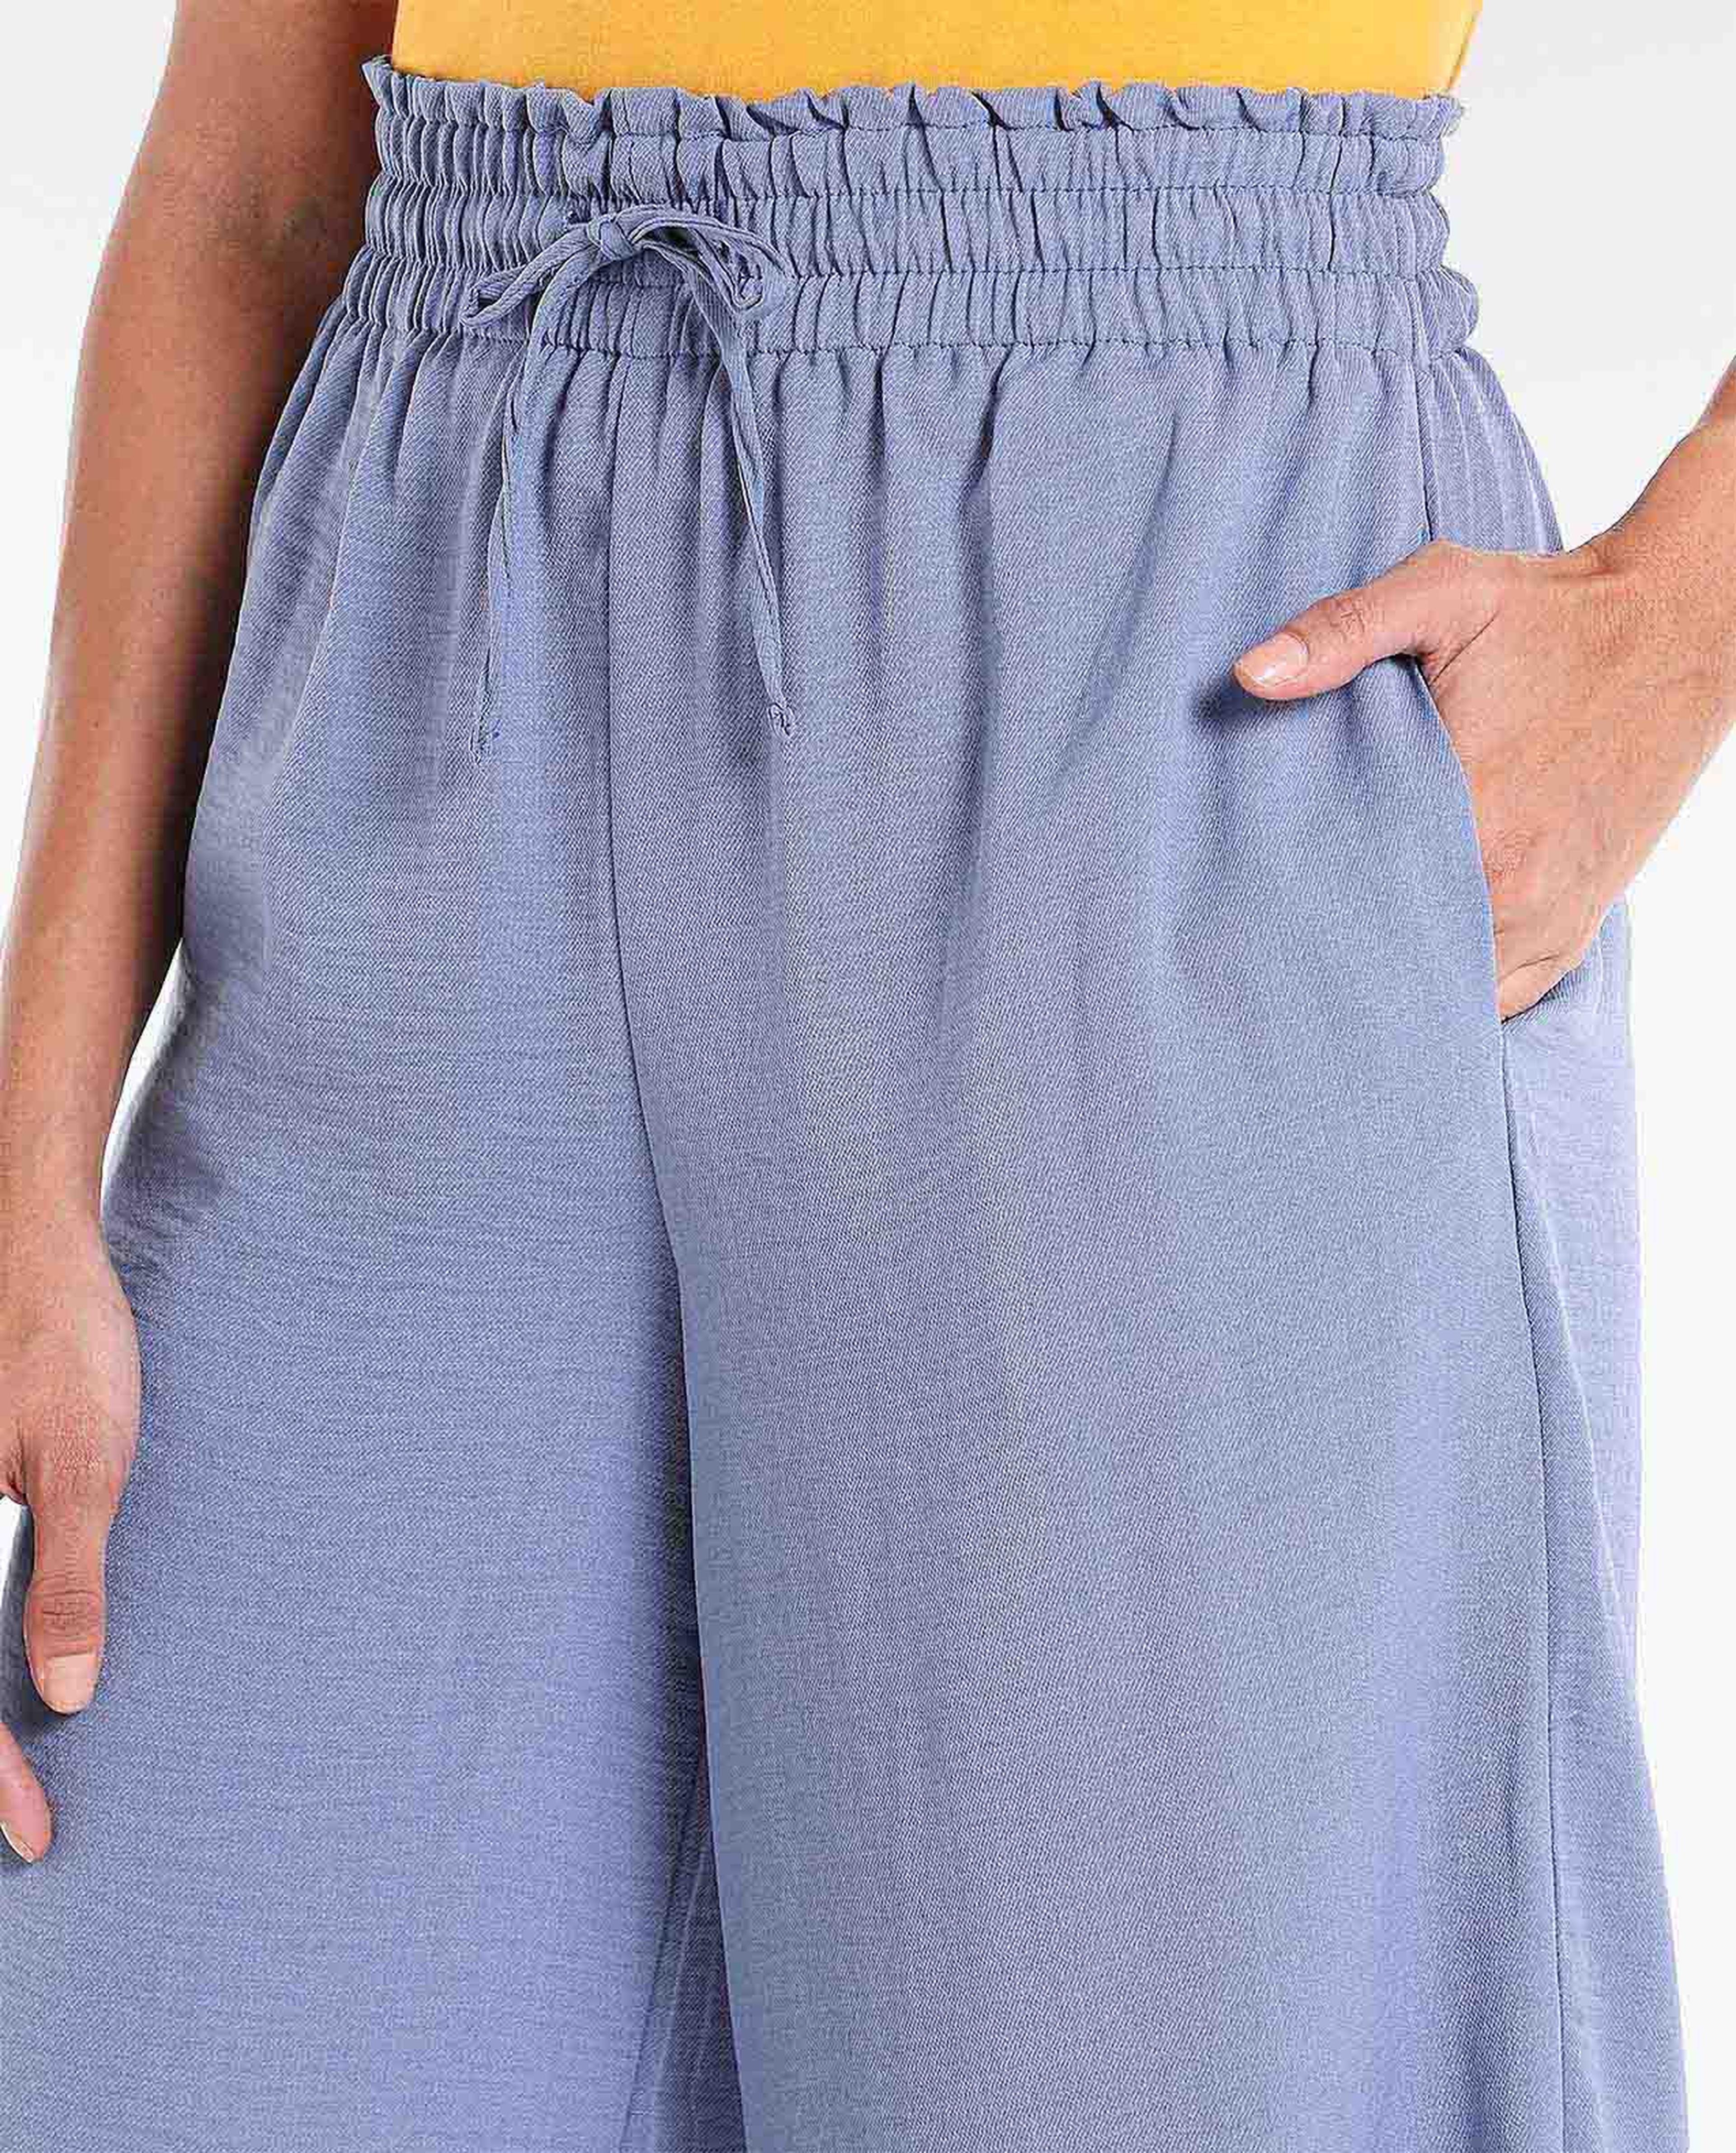 Solid Mid-Rise Culottes with Drawstring Closure